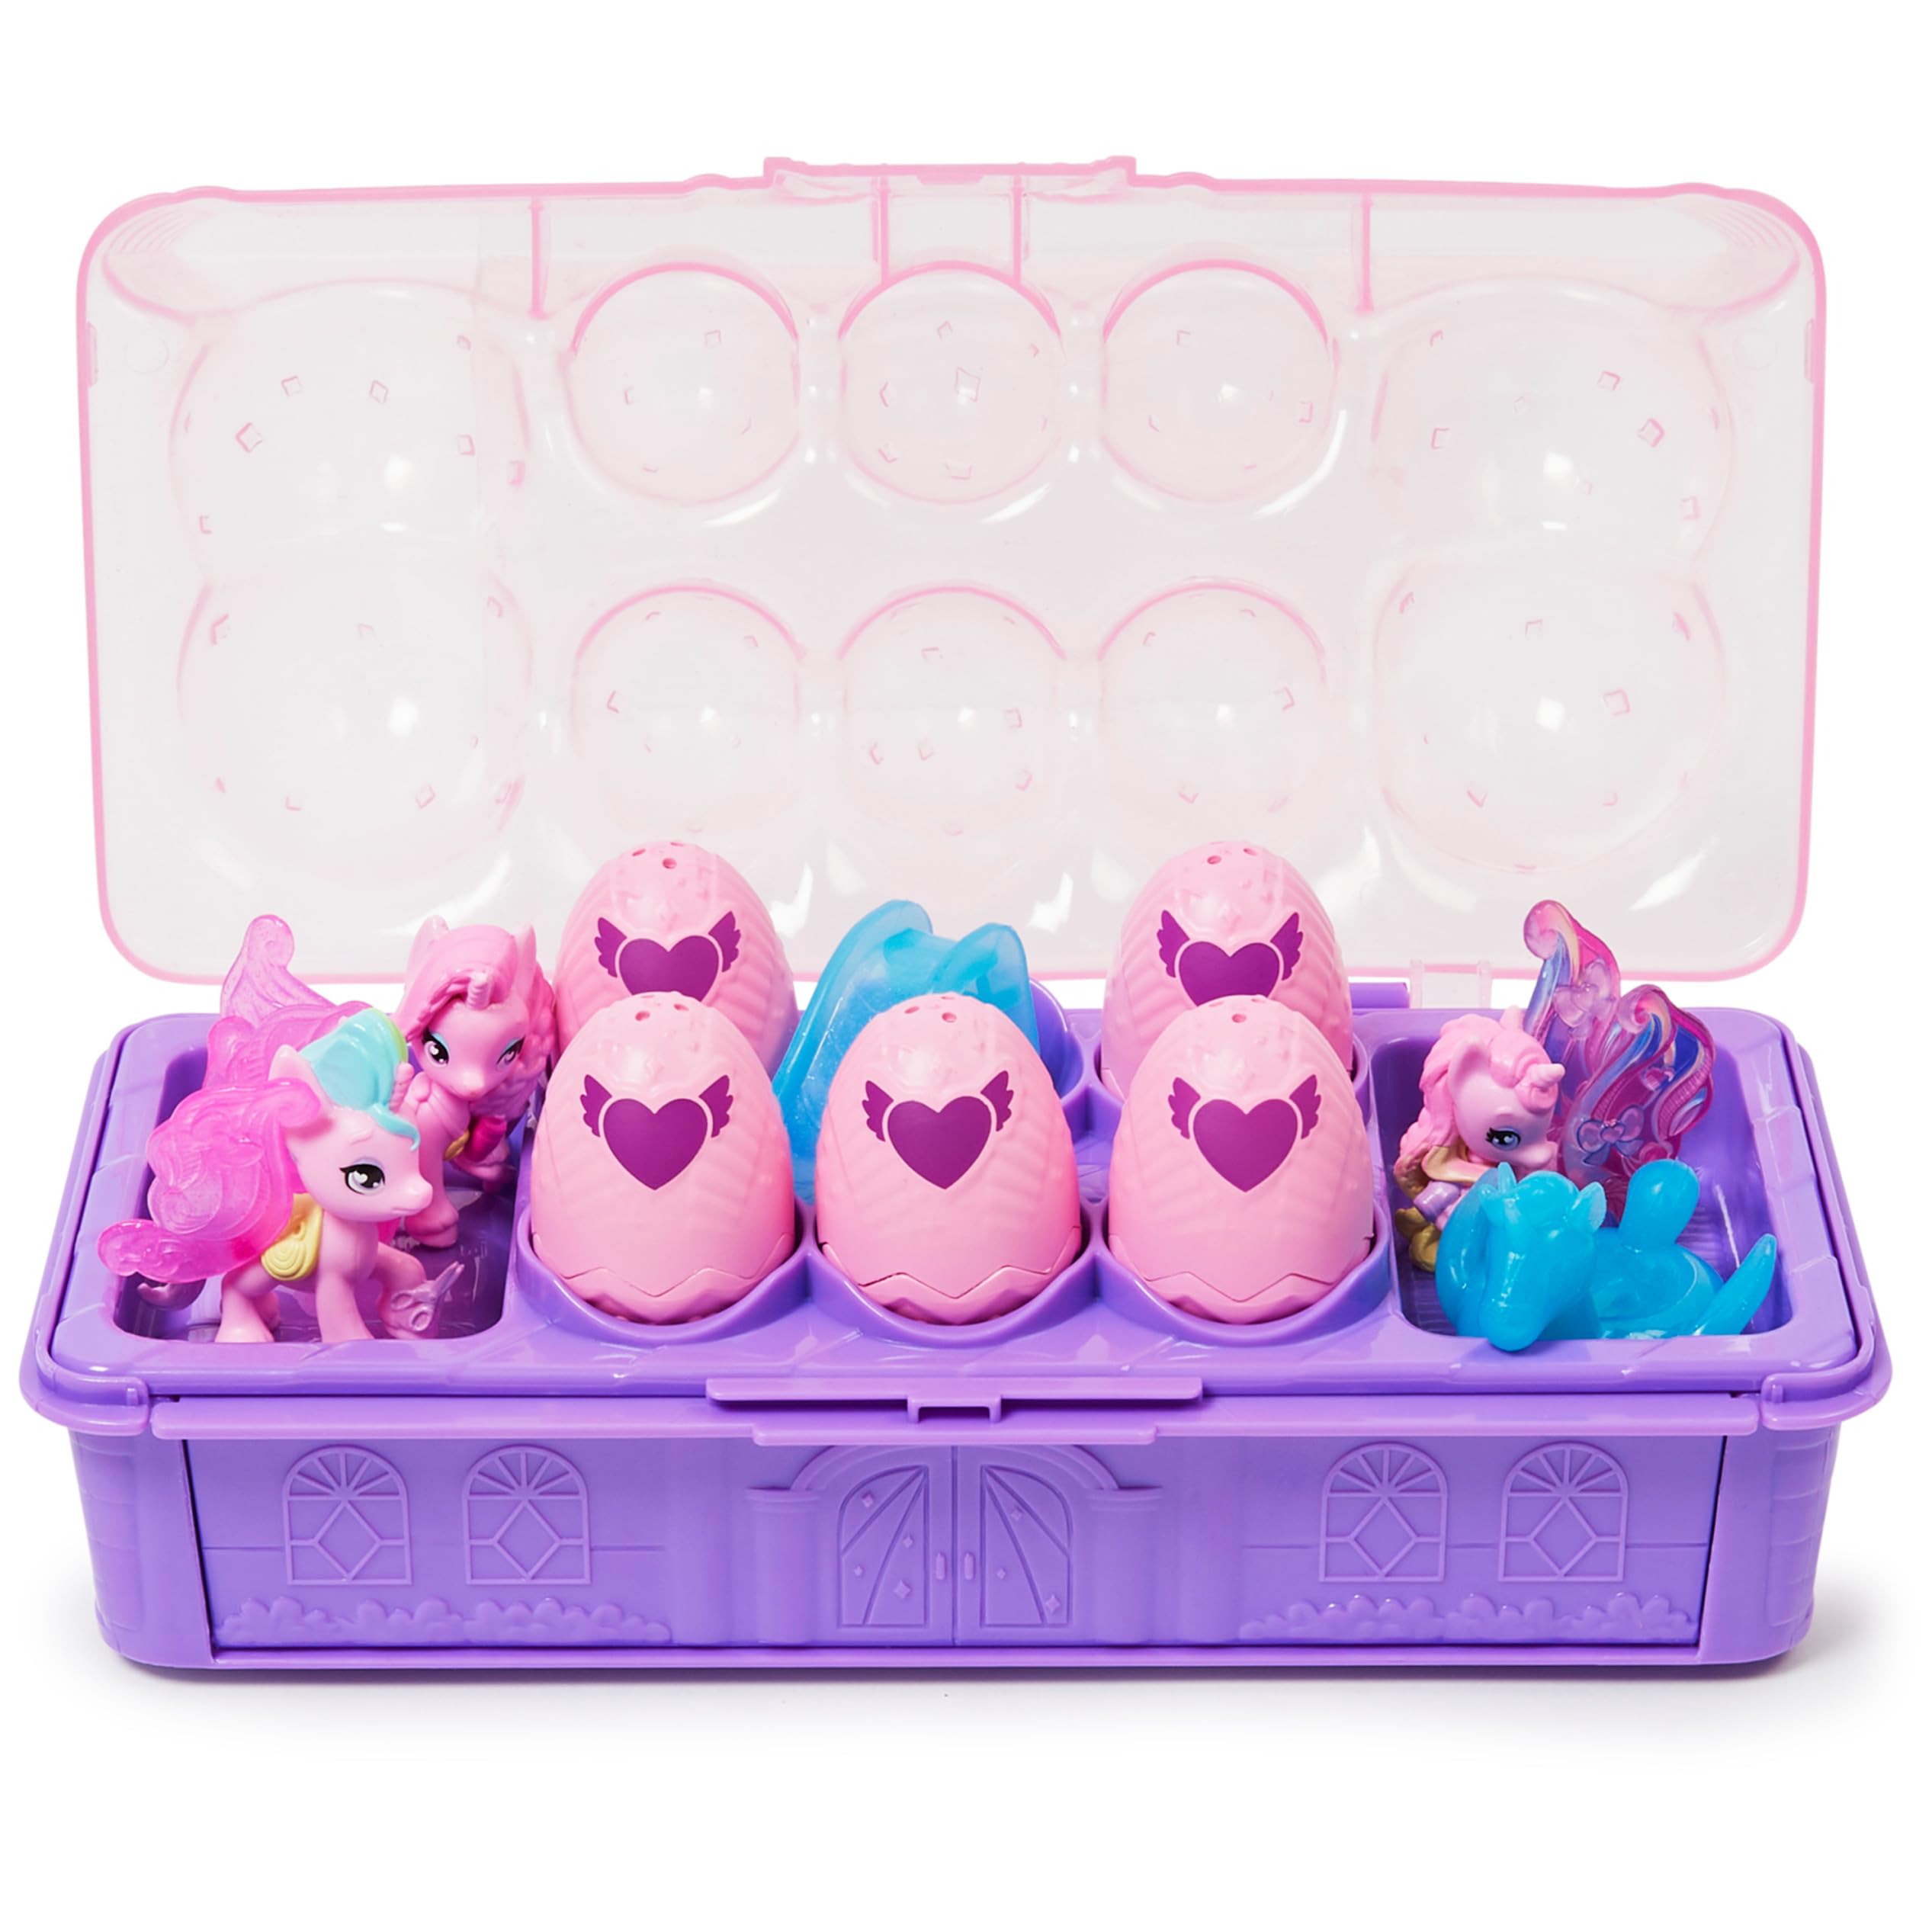 Hatchimals CollEGGtibles, Unicorn Family Carton with Surprise Playset, 10 Characters and 2 Accessories, Kids Toys for Girls Ages 5 and up